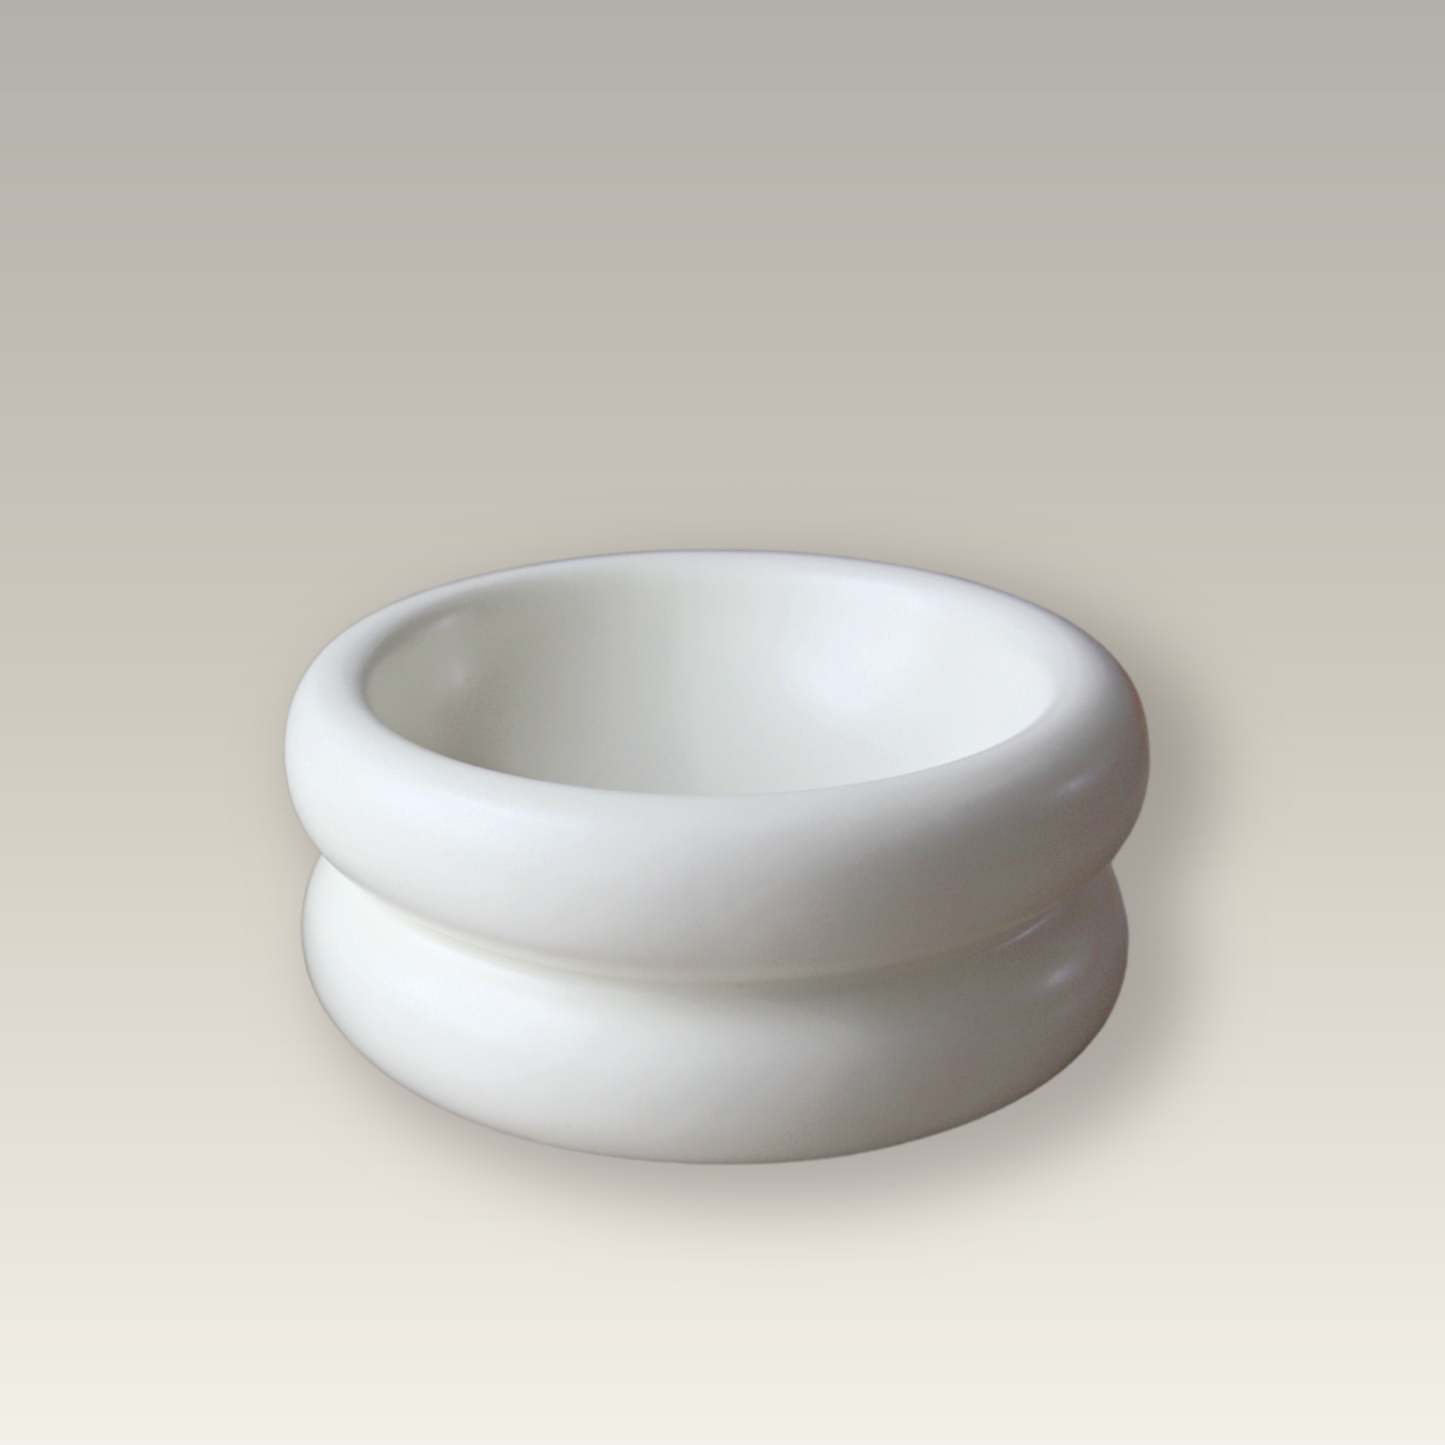 elevated cat bowl in white modern style by catenary that prevents whisker fatigue with wide and shallow design